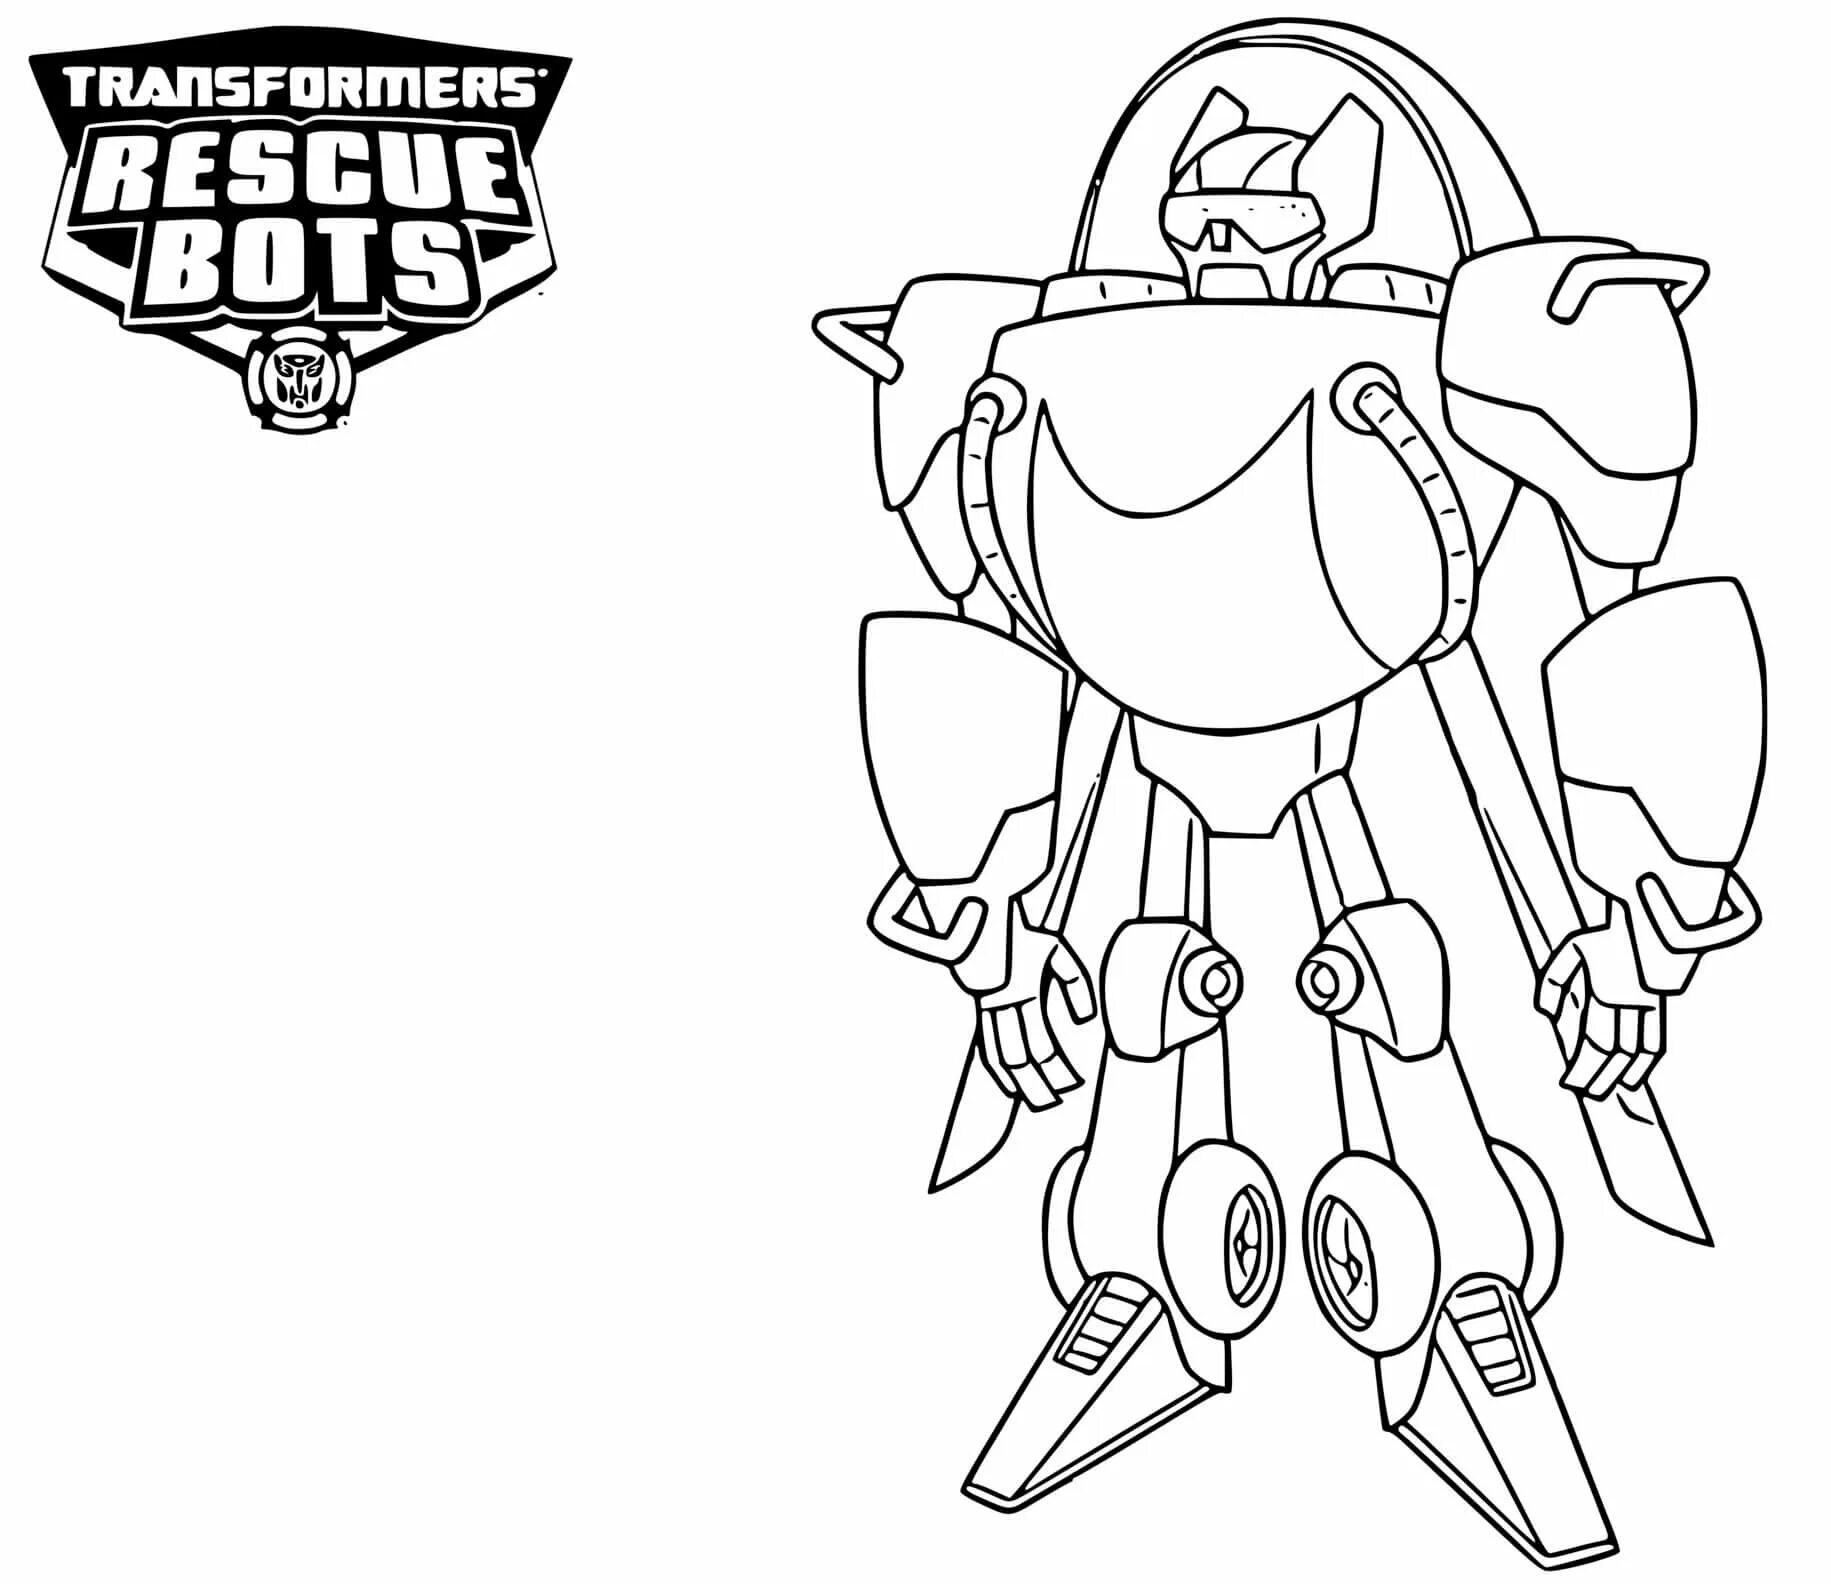 Outstanding Transformers Rescue Bots